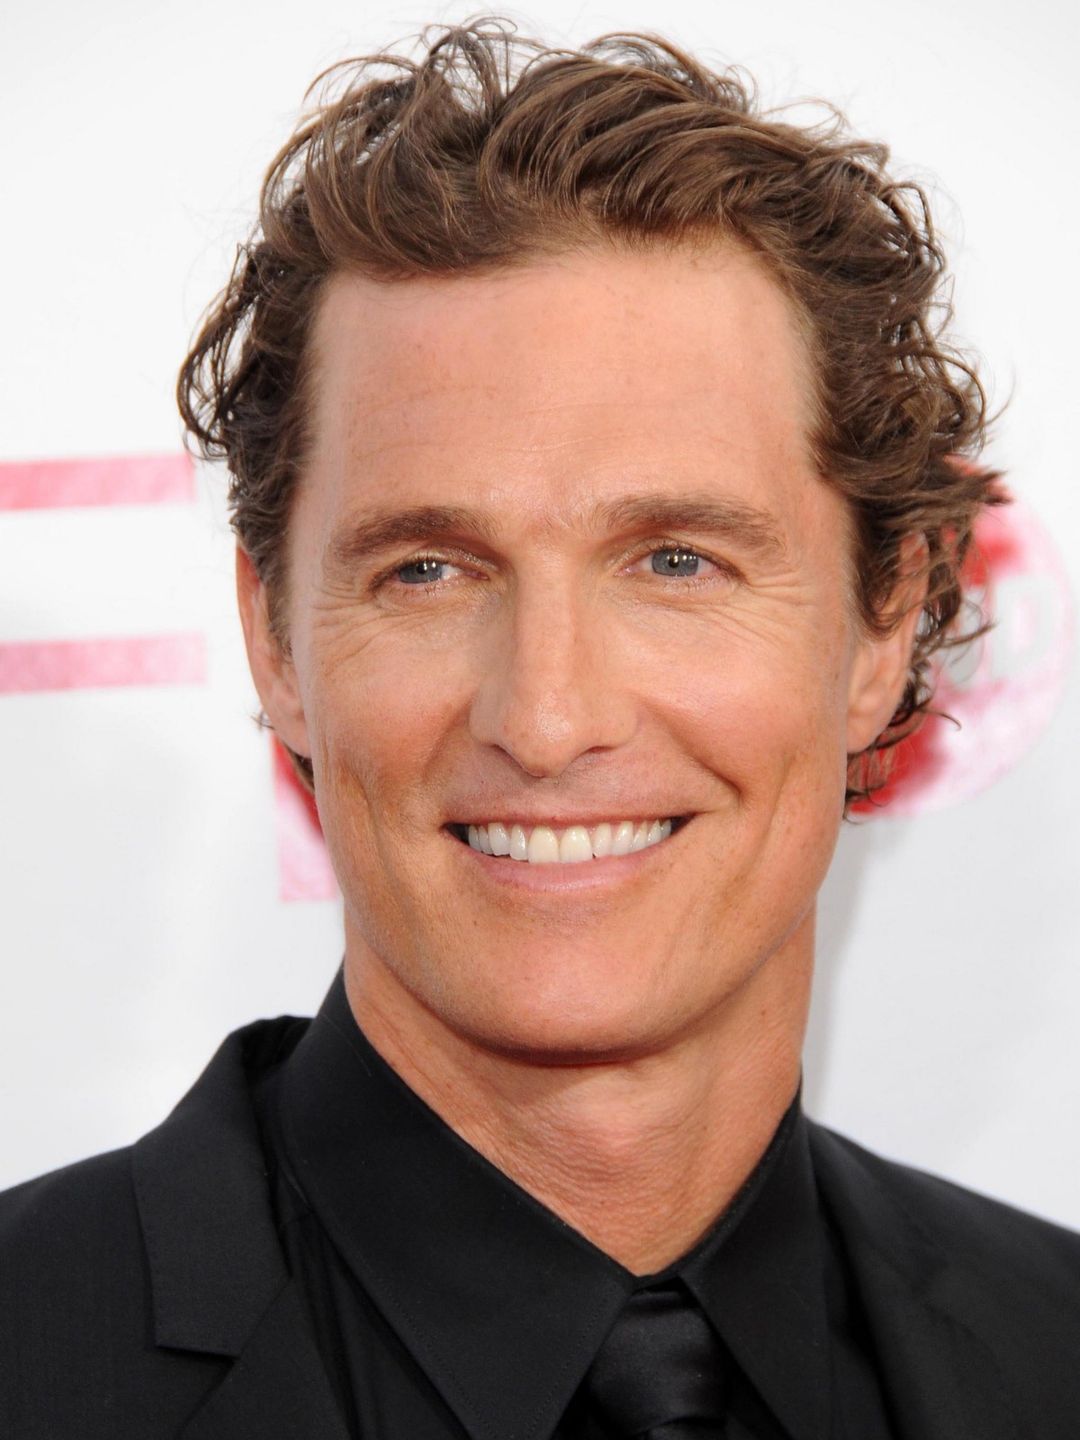 Matthew McConaughey who is his father